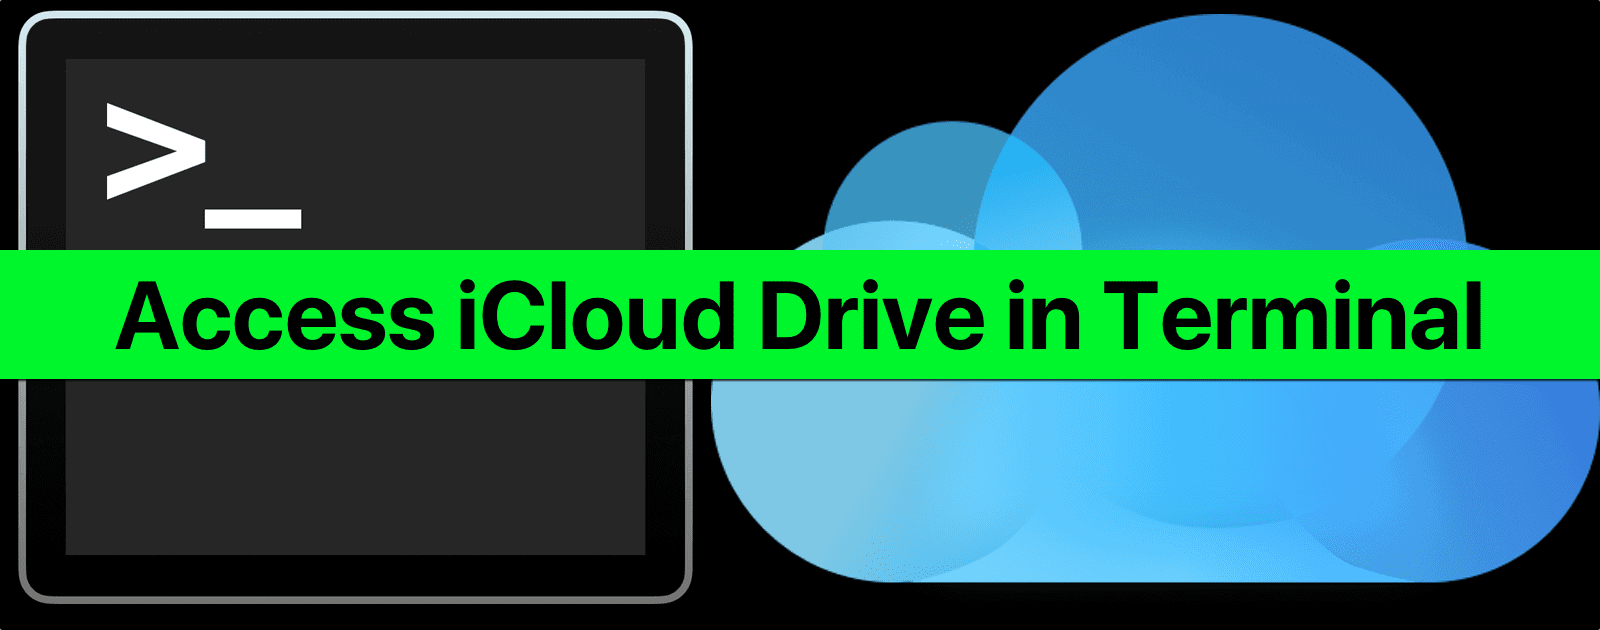 macOS: How to Access iCloud Drive in Terminal